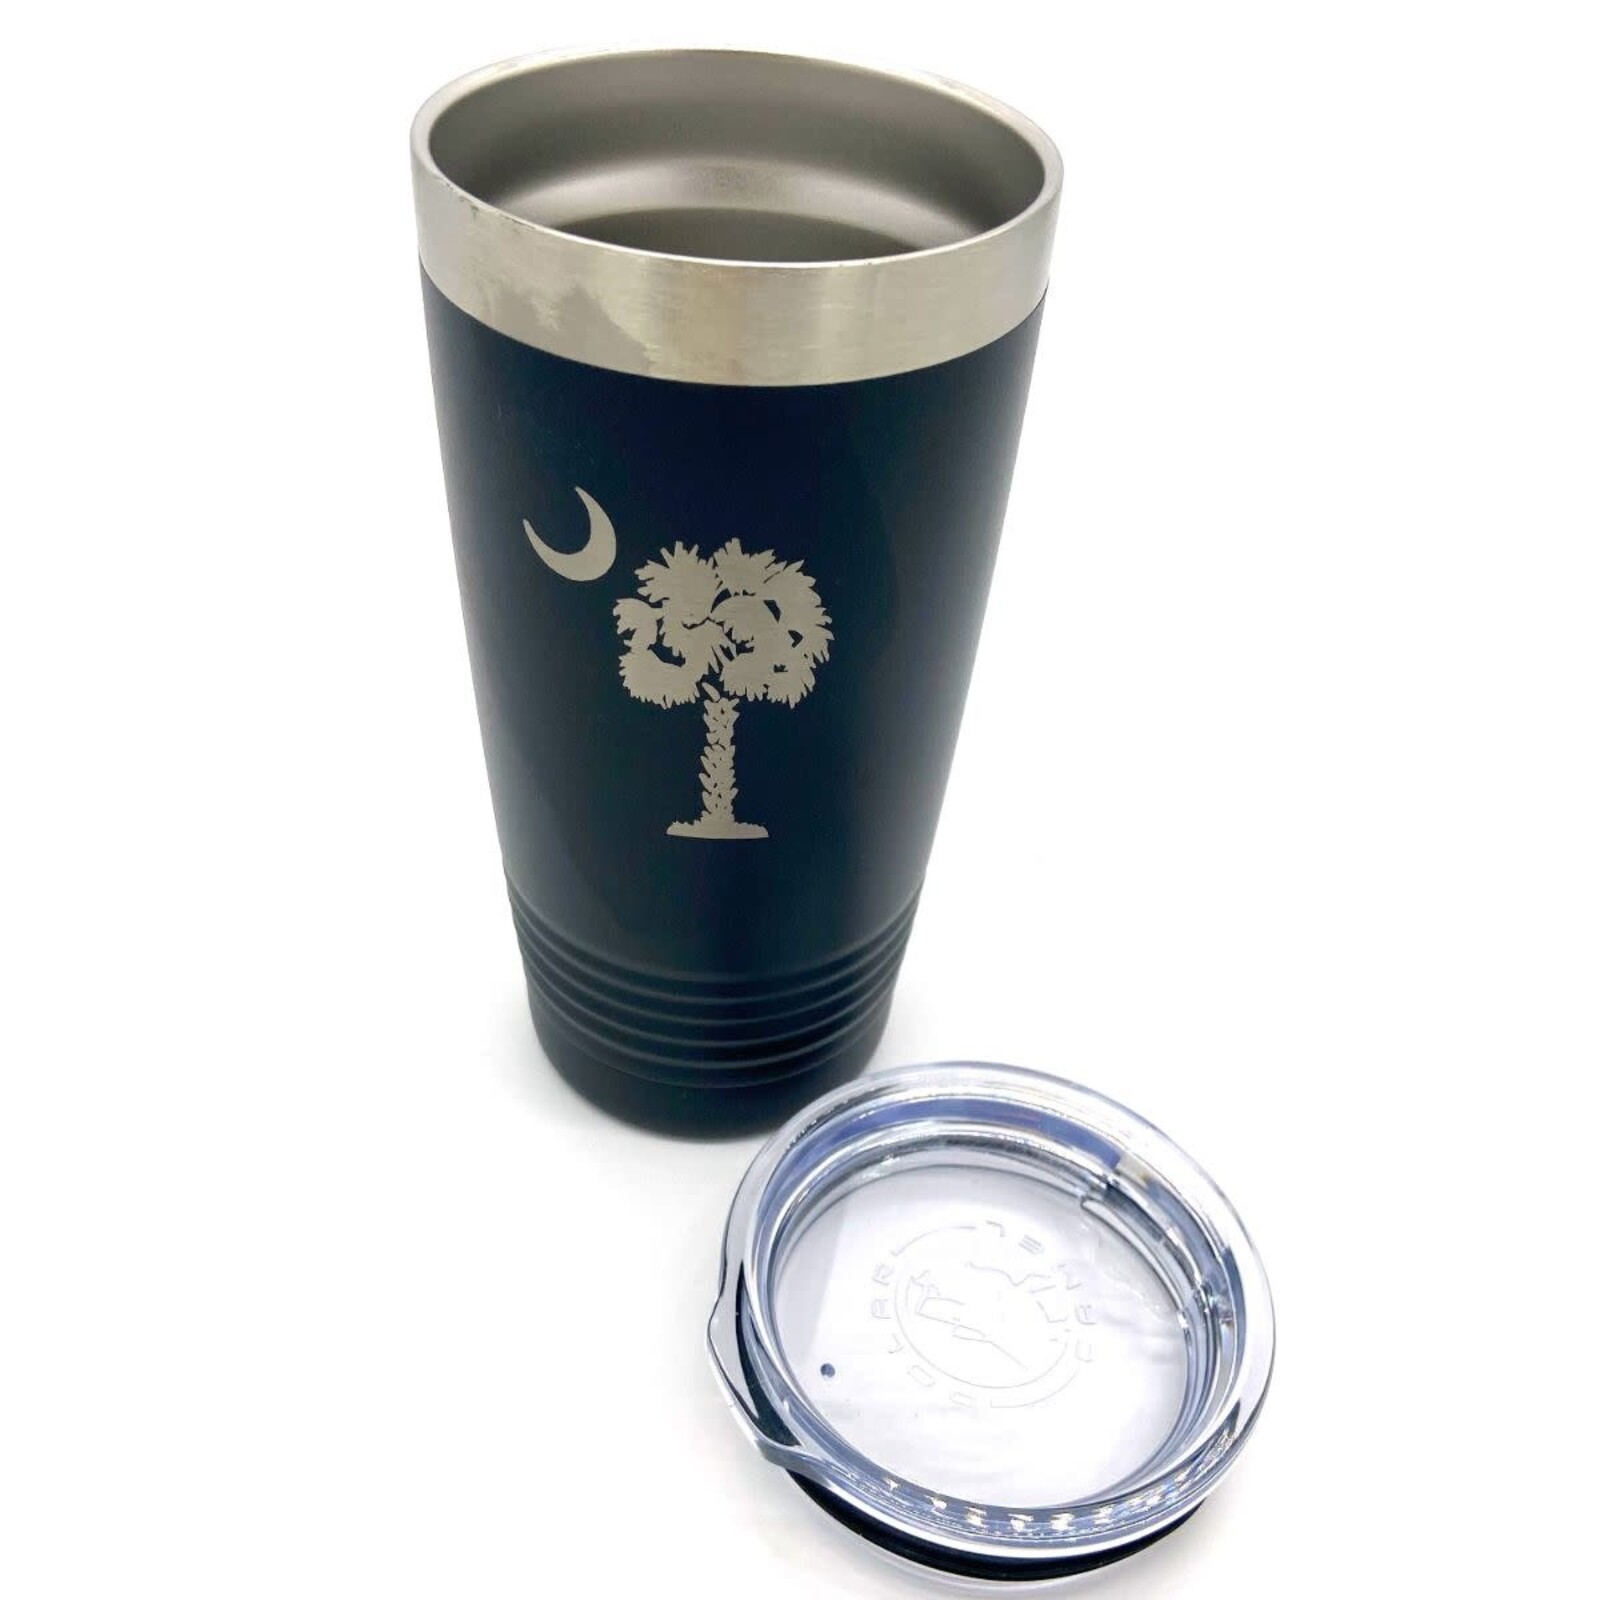 Custom Crafted Silhouettes Palmetto Tree Insulated Tumbler  Black   081121 loading=